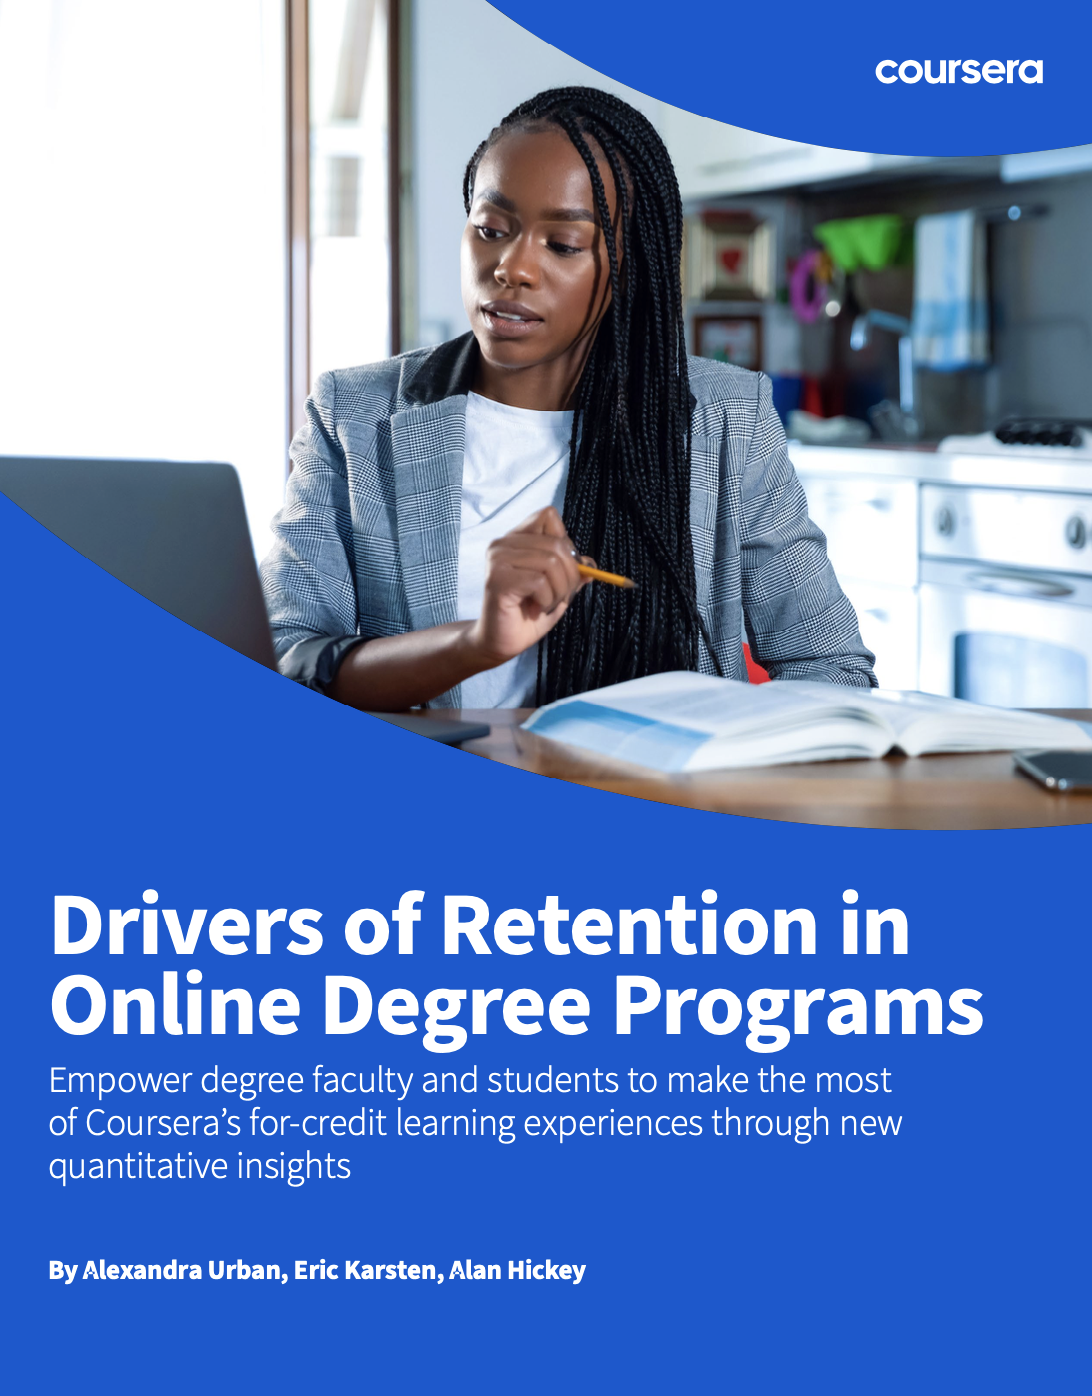 Report: Drivers of Retention in Online Programs (2022)